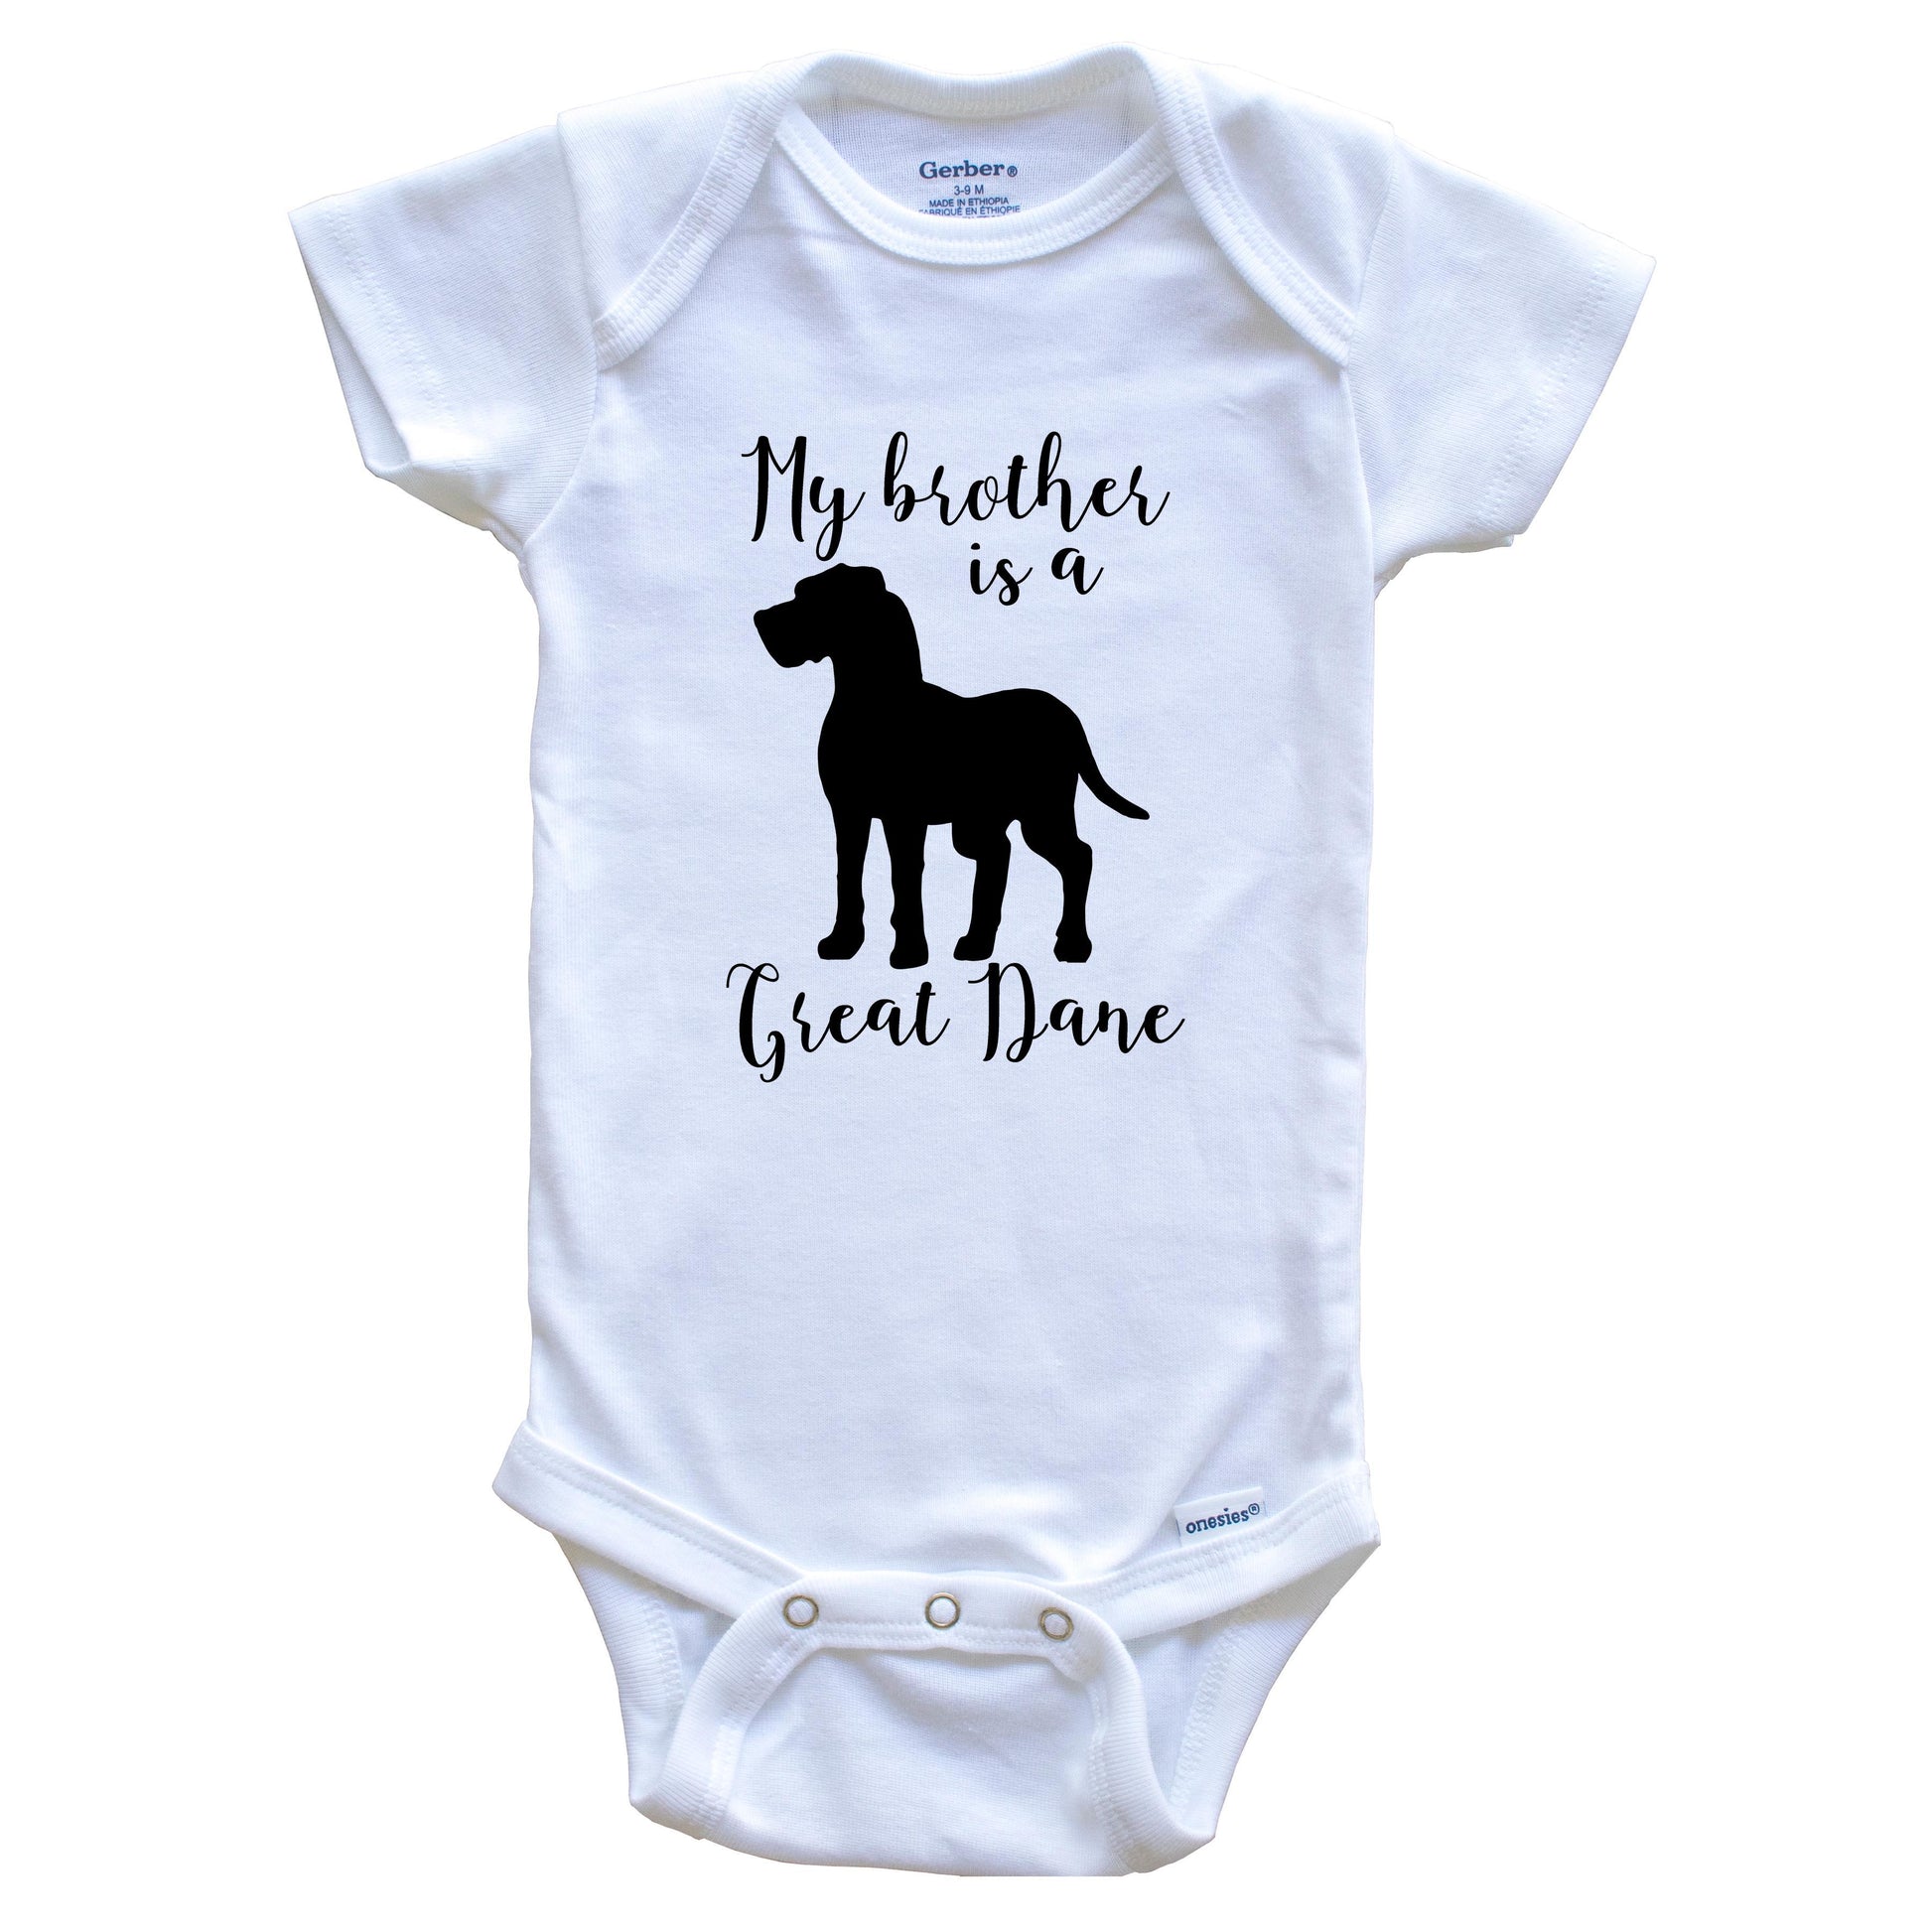 My Brother Is A Great Dane Cute Dog Baby Onesie - Great Dane One Piece Baby Bodysuit